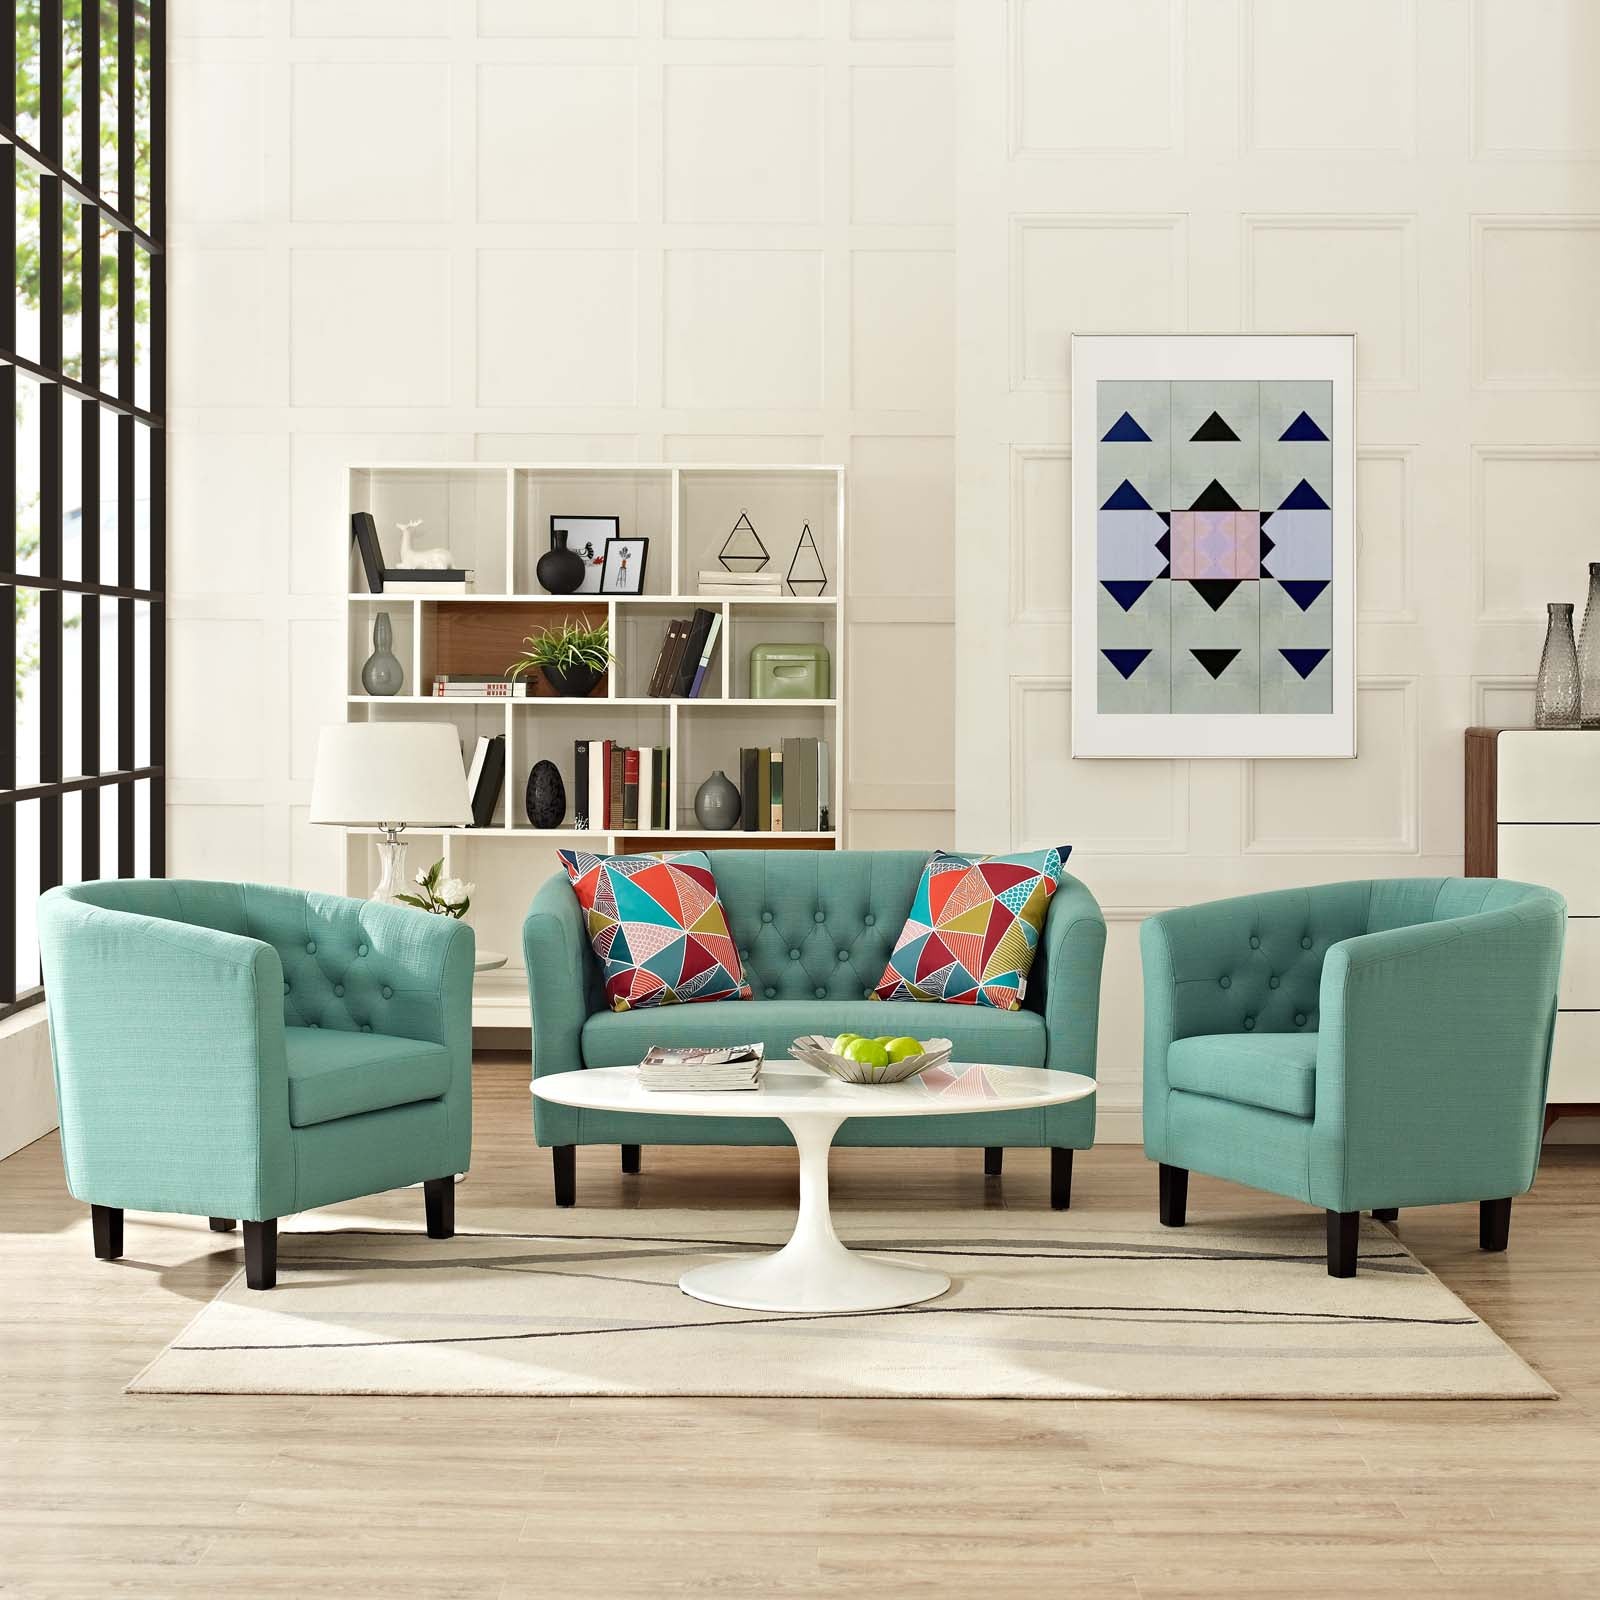 Modway Living Room Sets - Prospect 3 Piece Upholstered Fabric Loveseat and Armchair Set Laguna